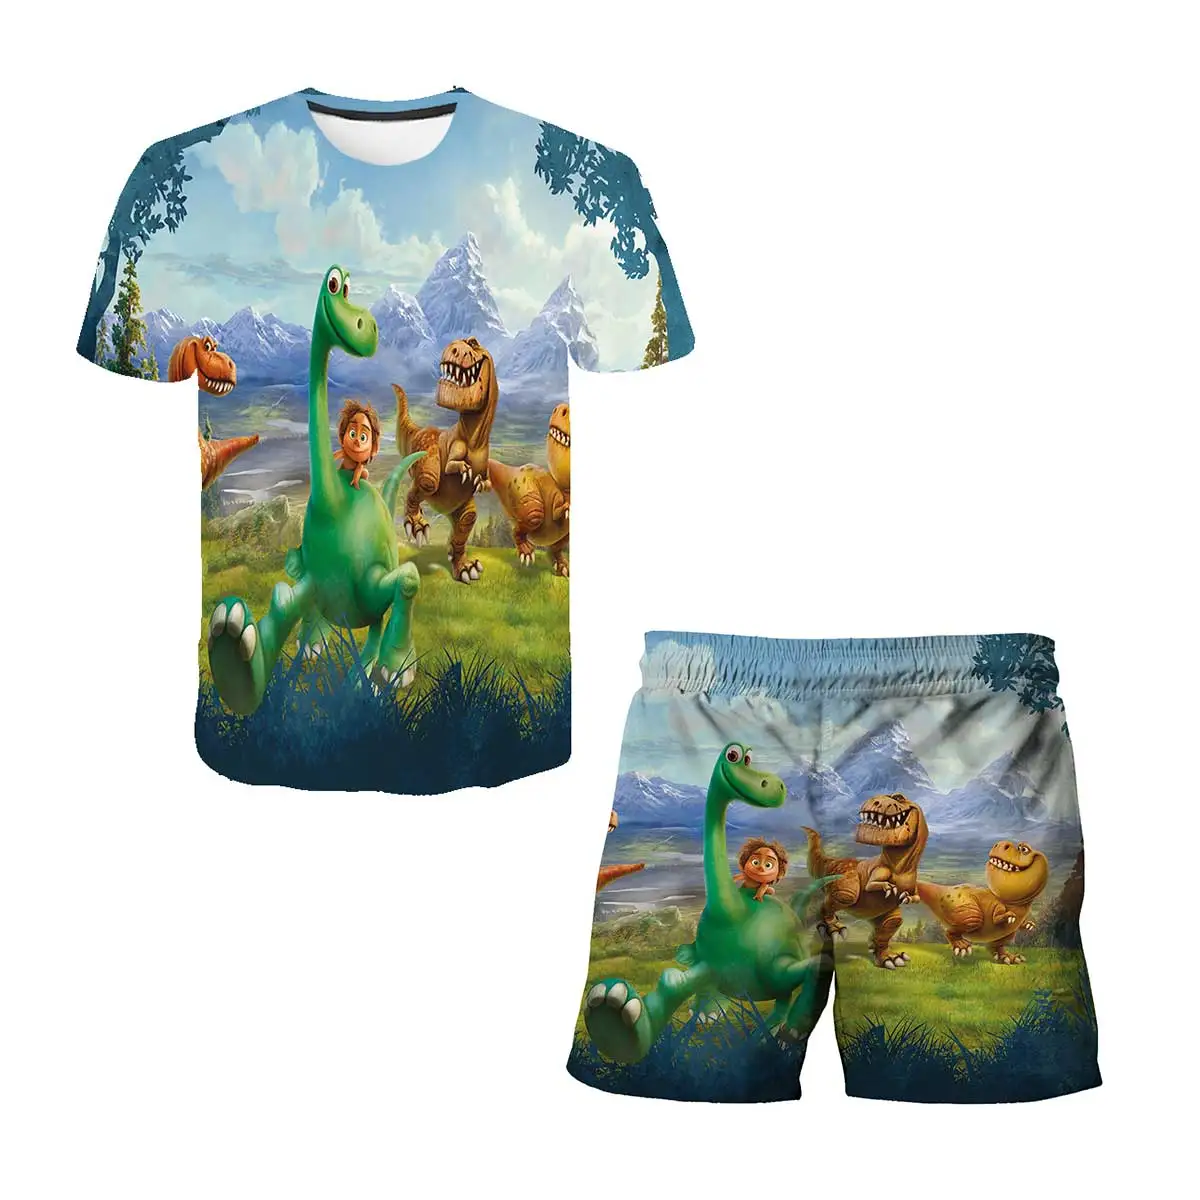 Fashion Baby Boy's Jura ssic Park 3 Suit Summer Casual Clothes Set Top Shorts 2PCS Baby Clothing Set for Boys Suits Kids Clothes